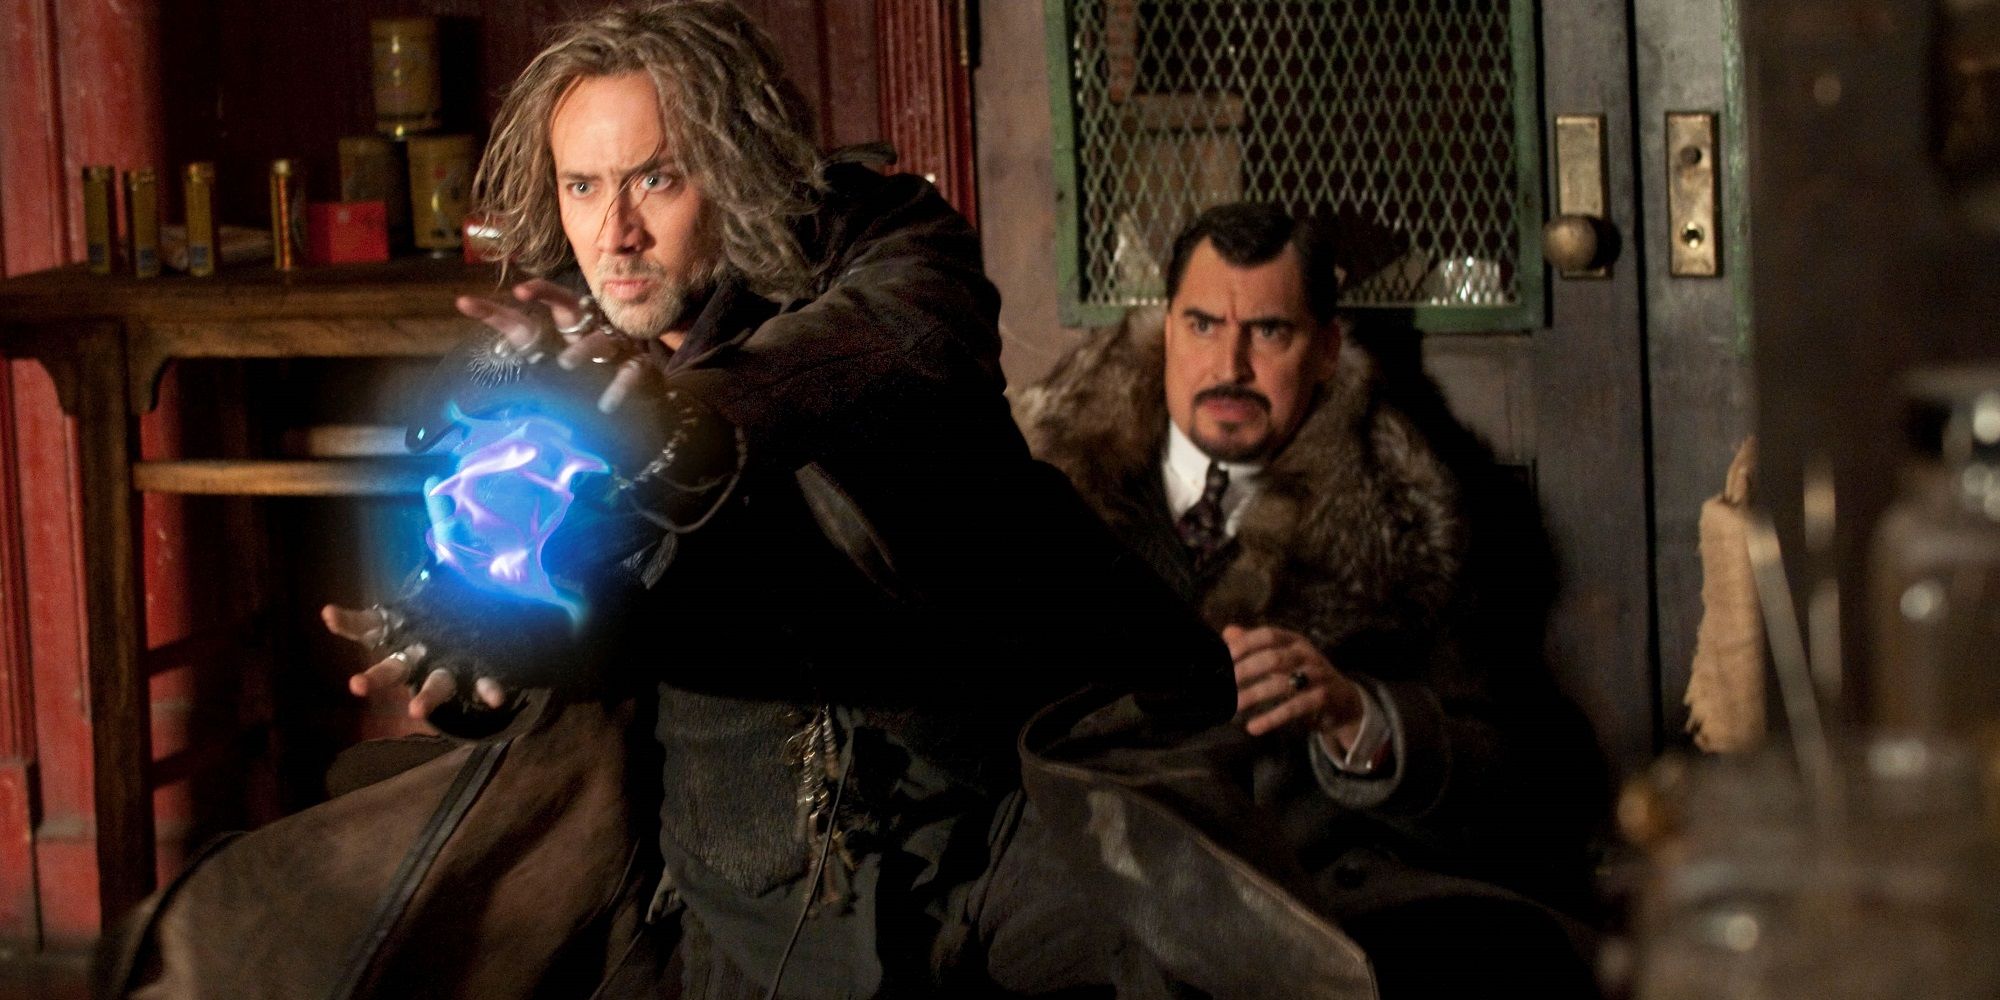 Nicholas Cage casts a spell in The Sorcerer's Apprentice